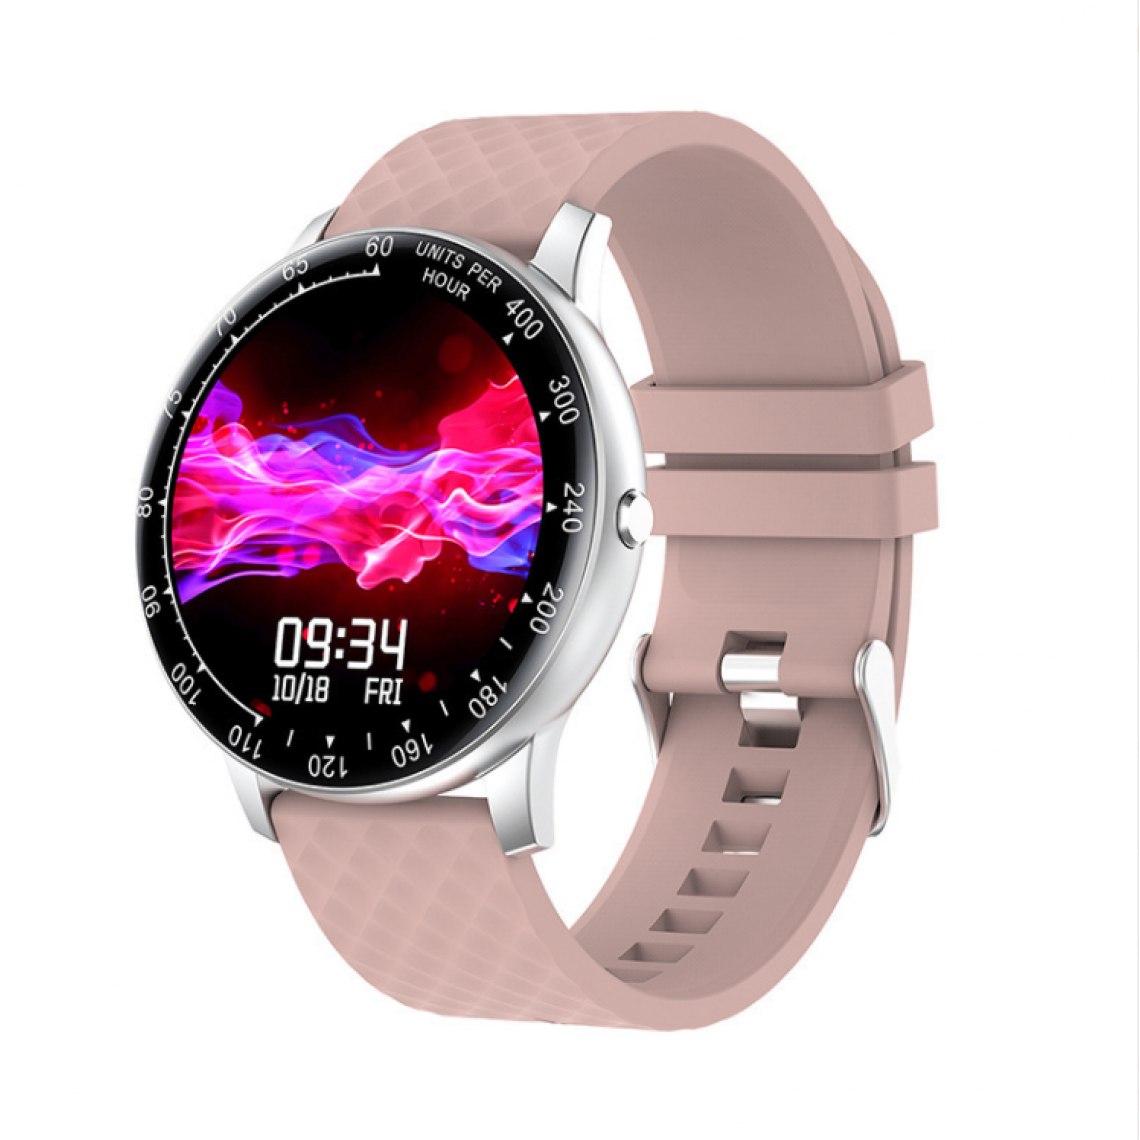 Chronotech Montres - Smart watch, fitness tracker, sleep detection with heart rate and blood pressure, suitable for work, sportsï¼pinkï¼ - Montre connectée